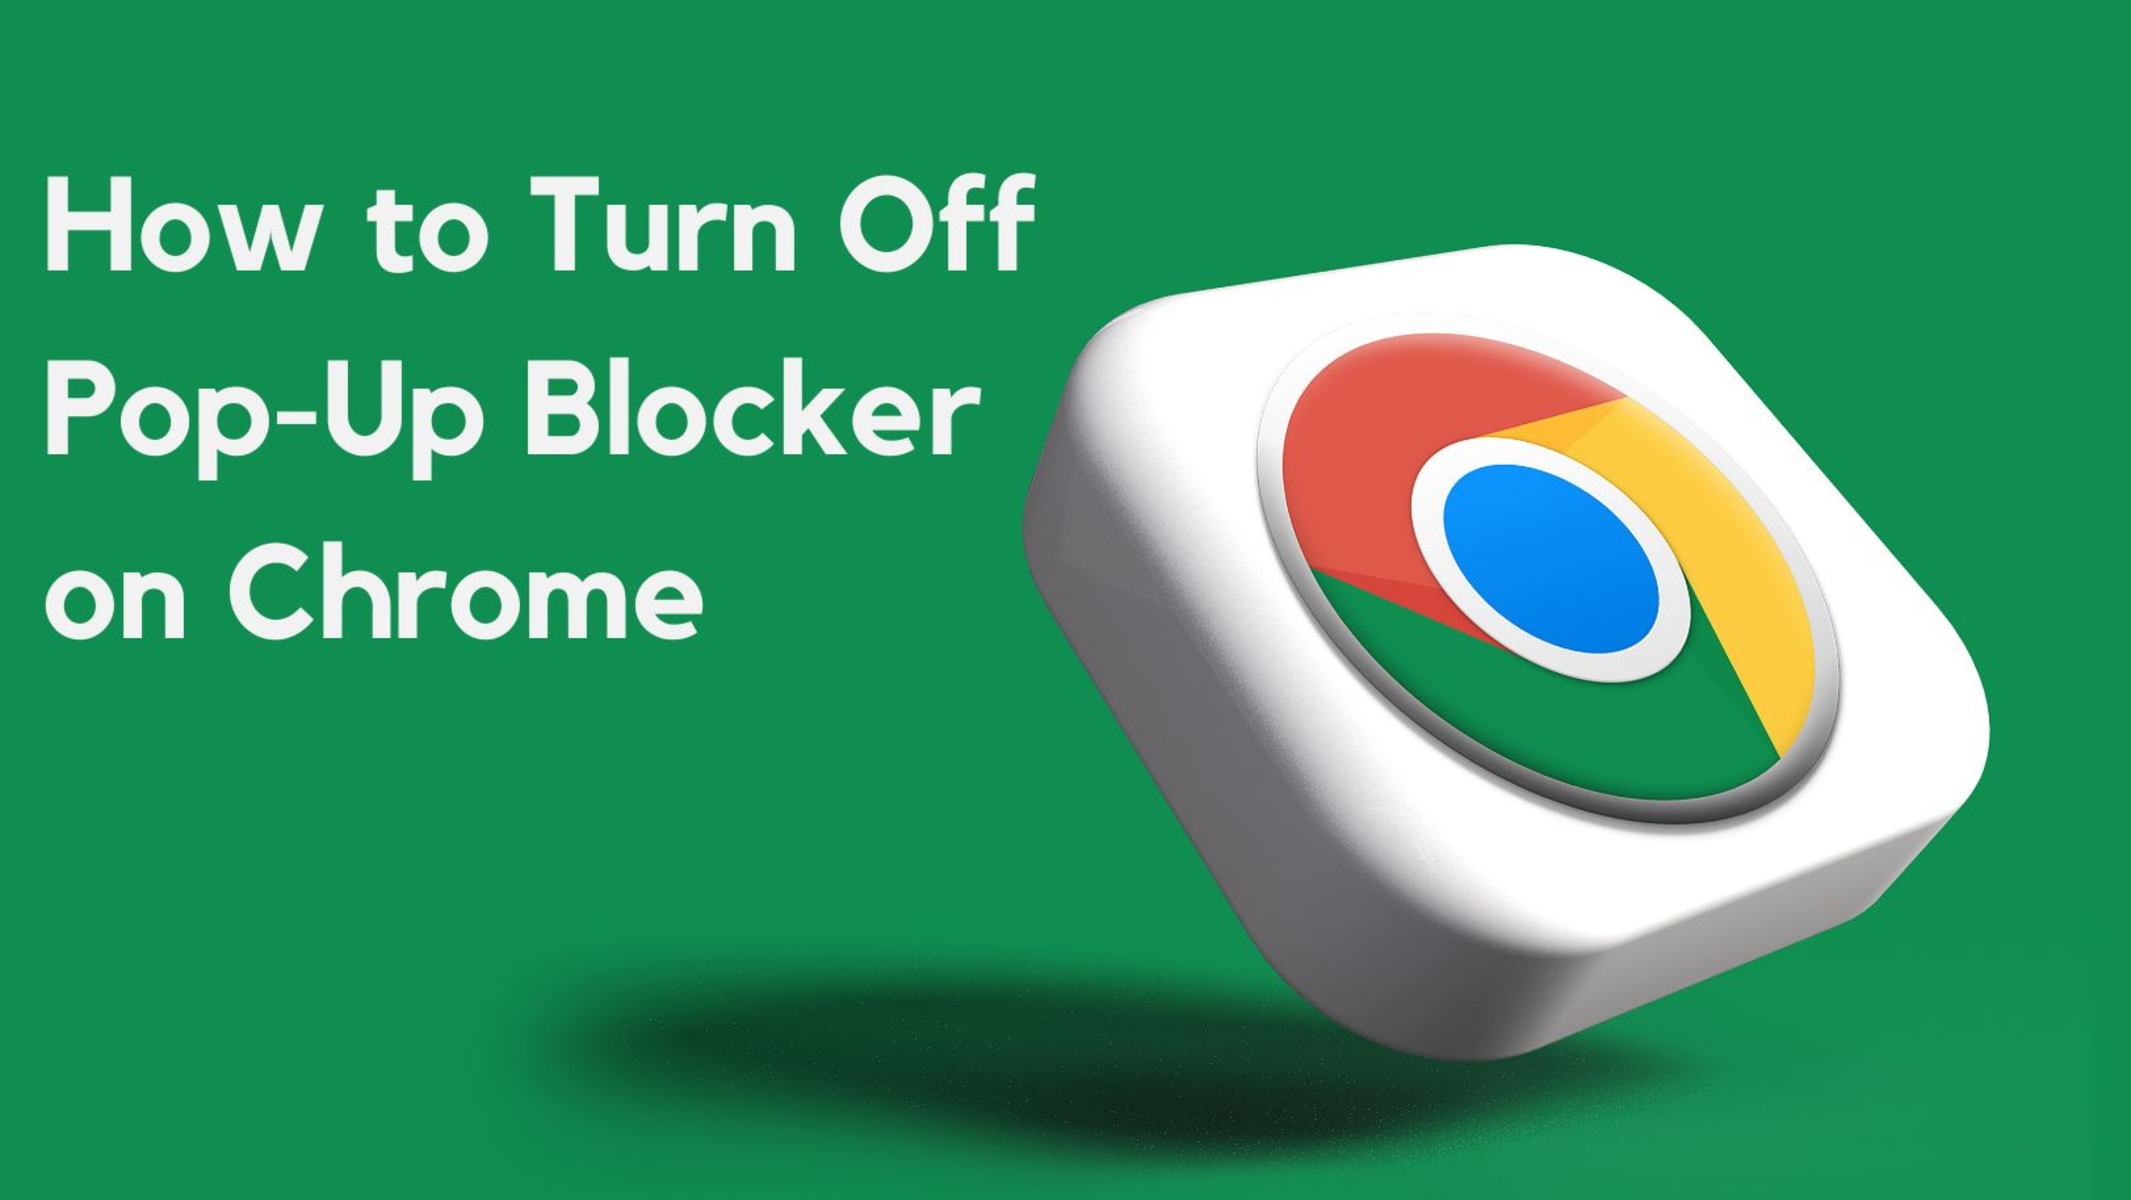 How To Turn Off Pop-Up Blocker In Chrome